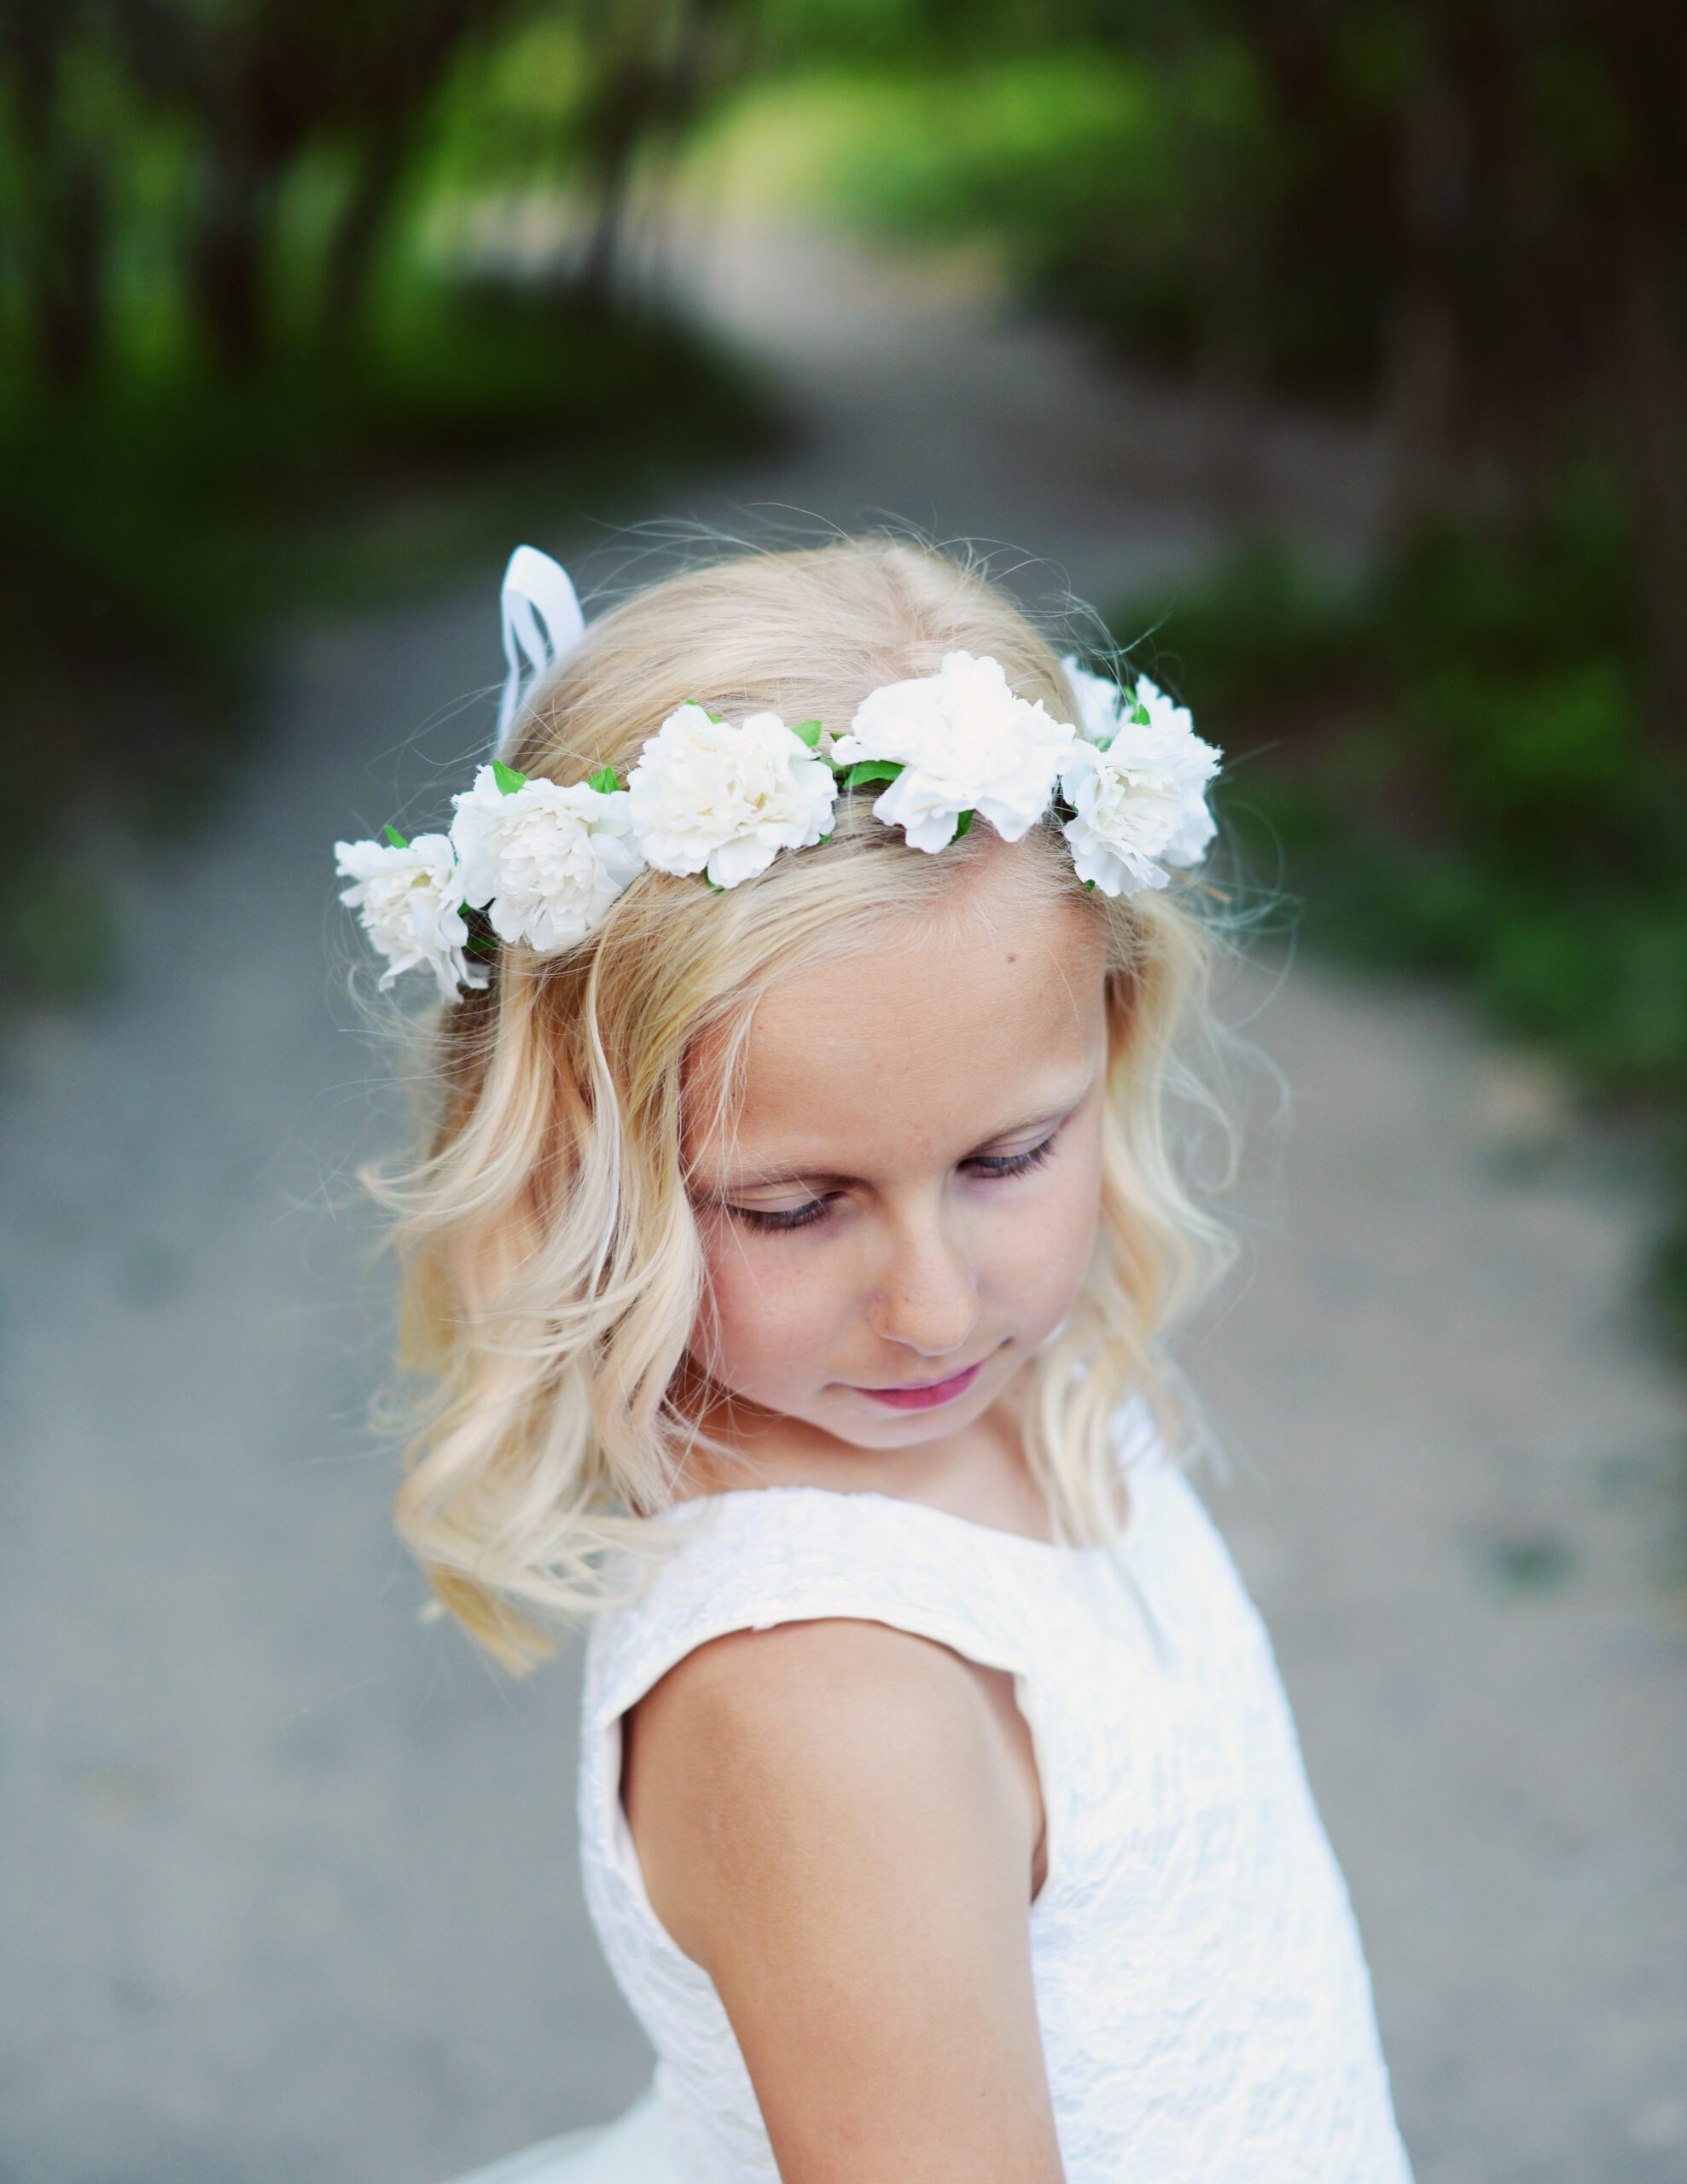 A photo of a flower girl wearing a white rose hair crown